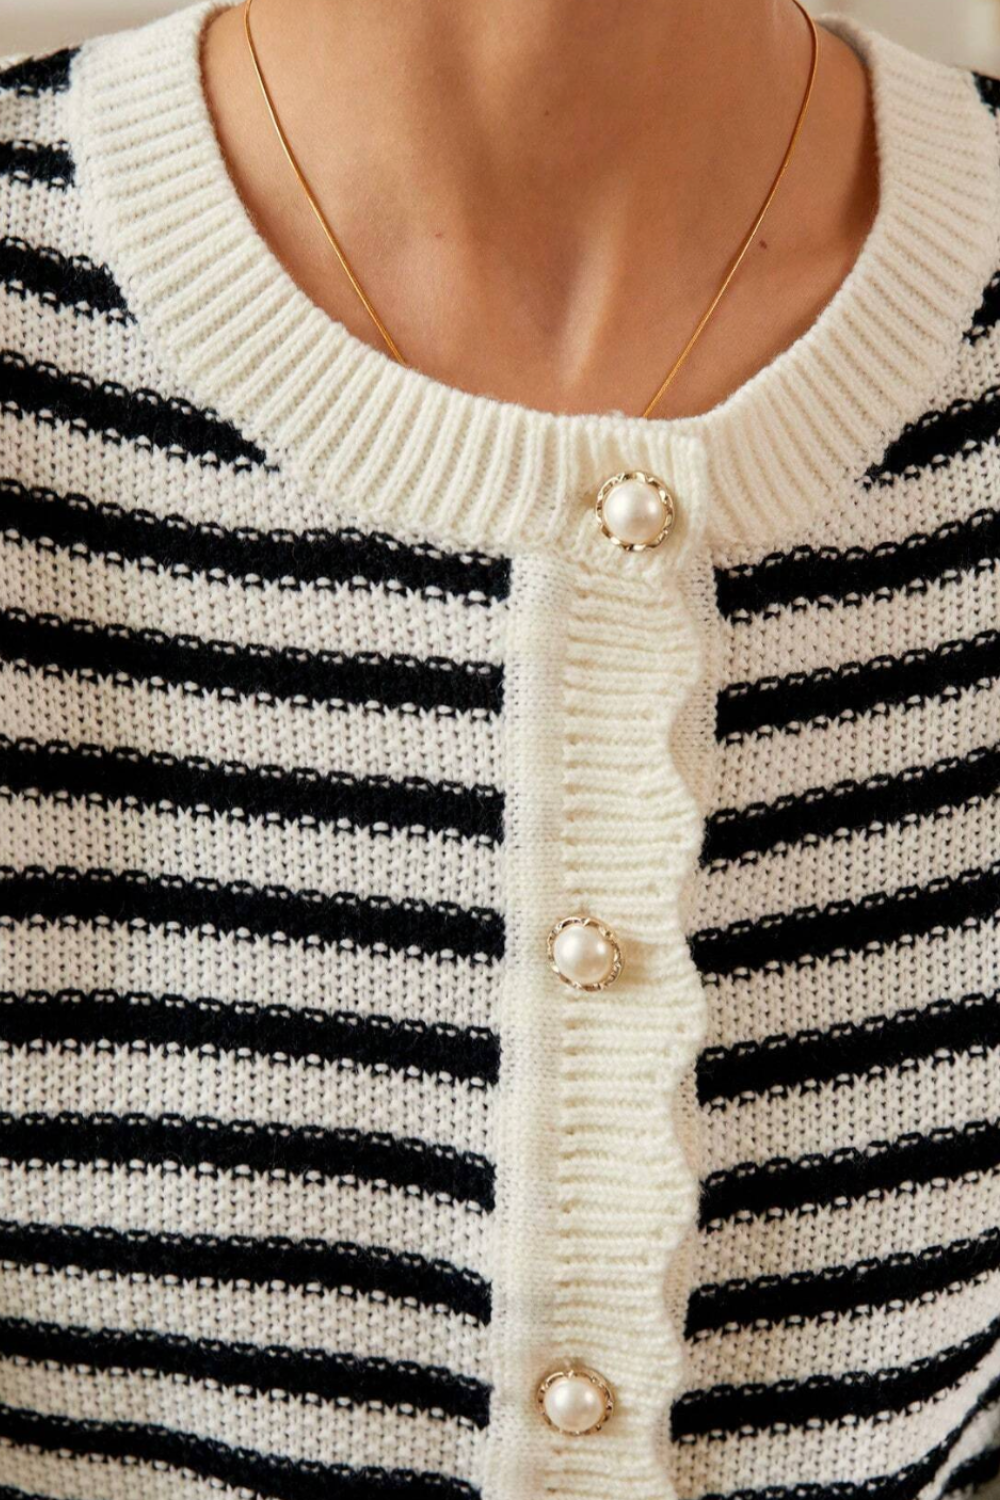 Keeping it Snuggly Striped Cardigan Sweater